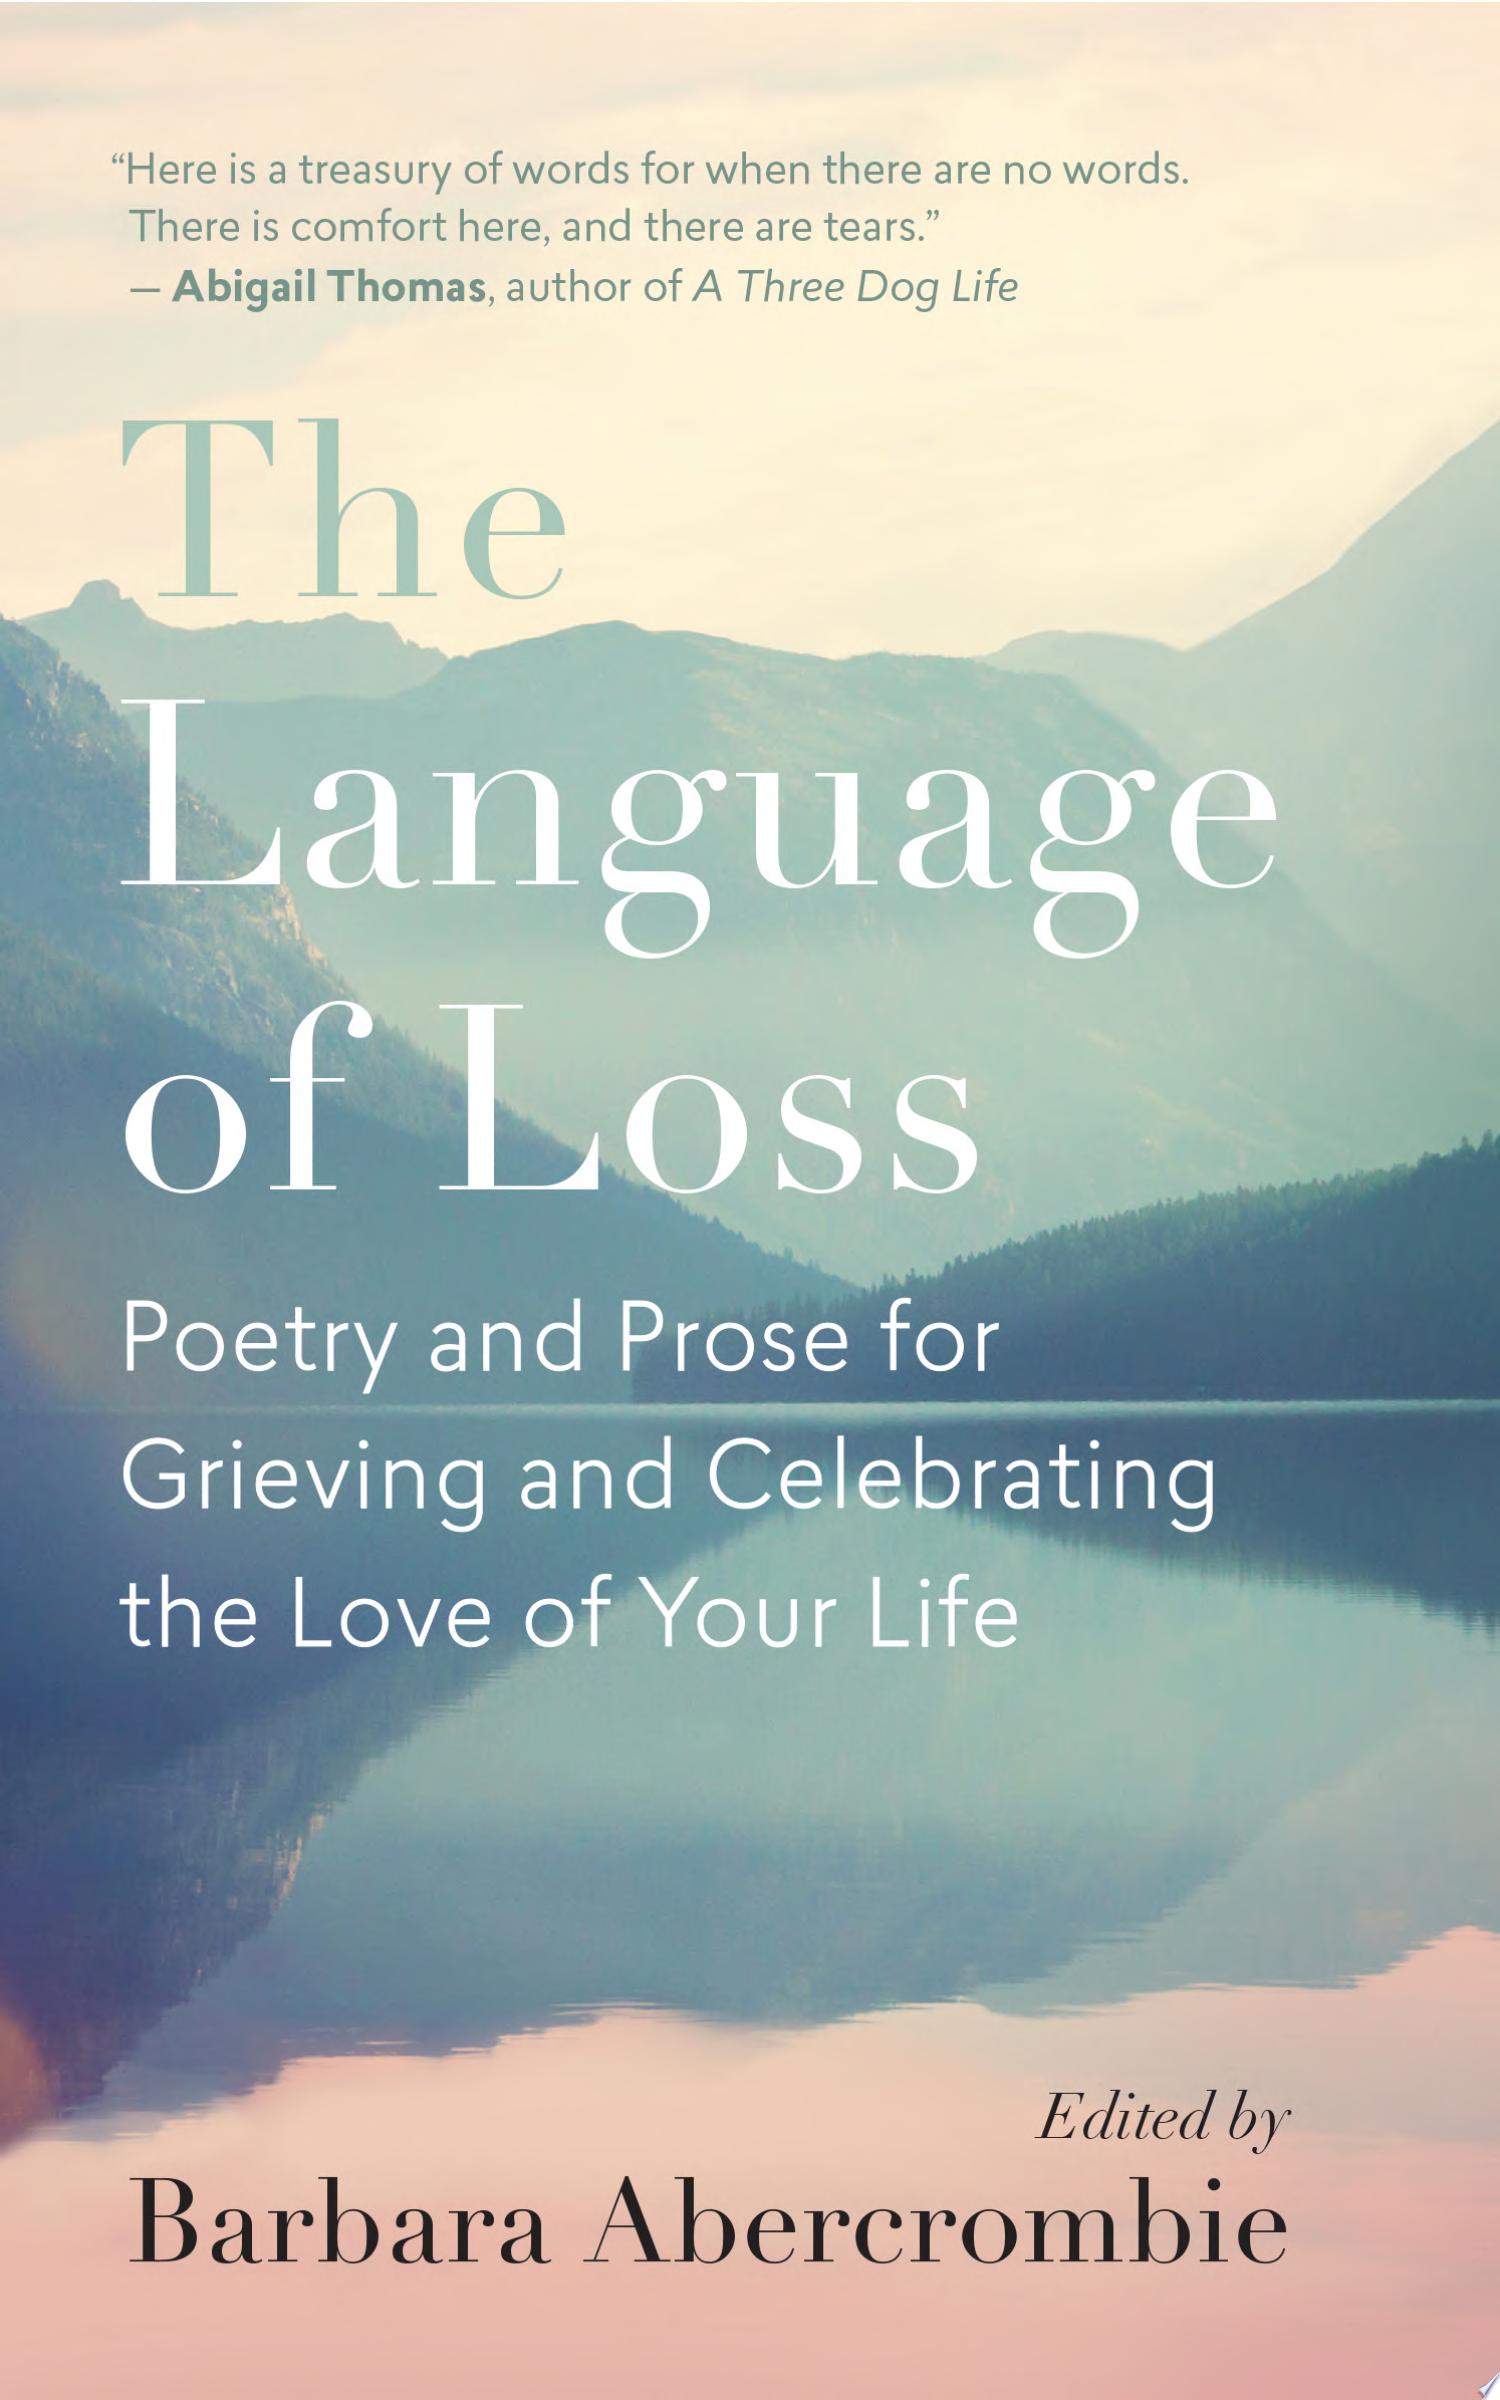 Image for "The Language of Loss"